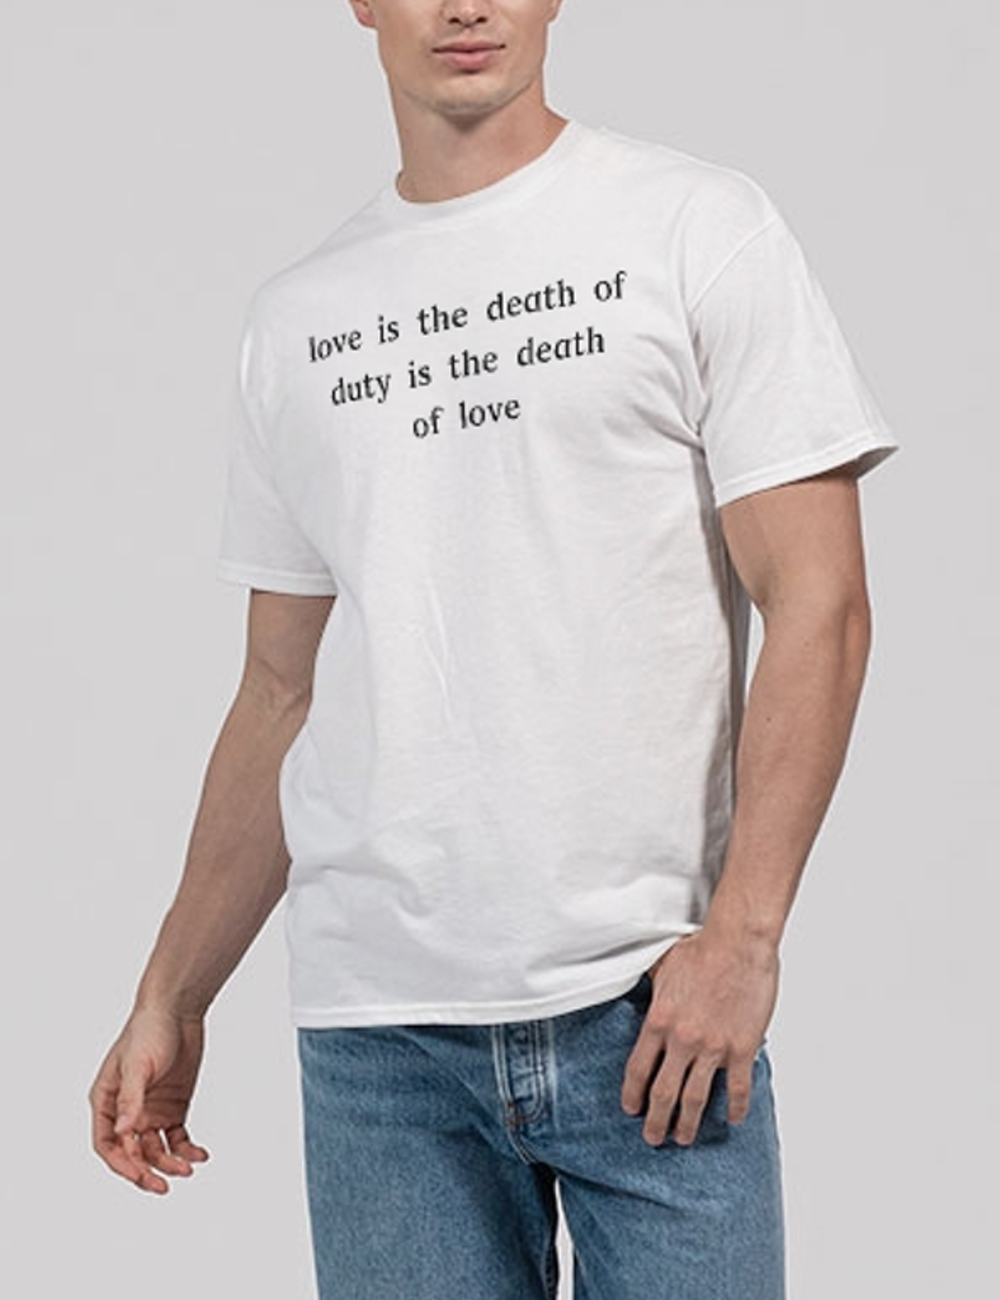 Love Is The Death Of Duty Is The Death Of Love Men's Classic T-Shirt OniTakai